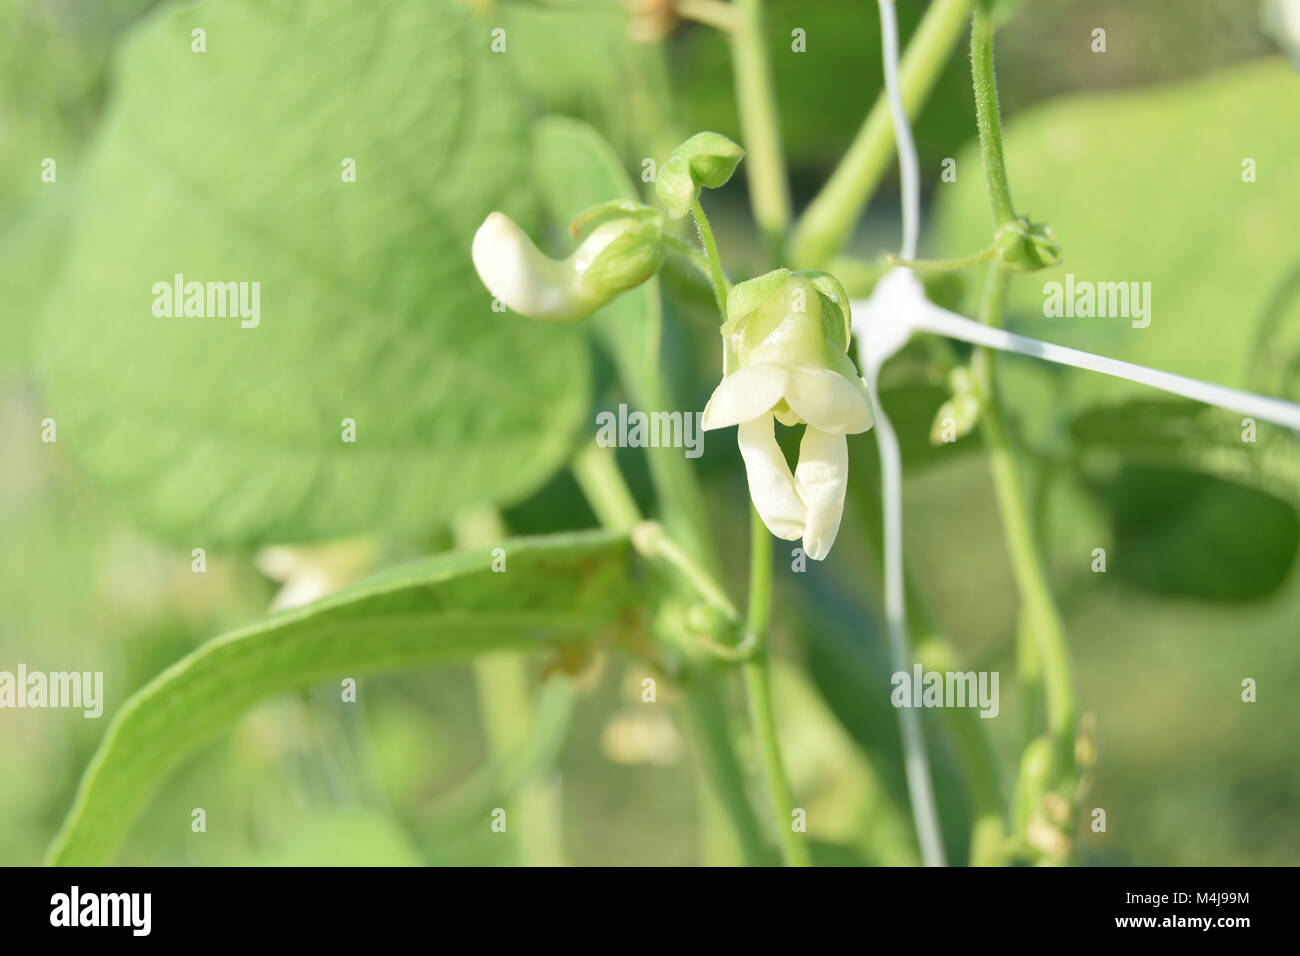 Green beans on the plant just bloomed Stock Photo